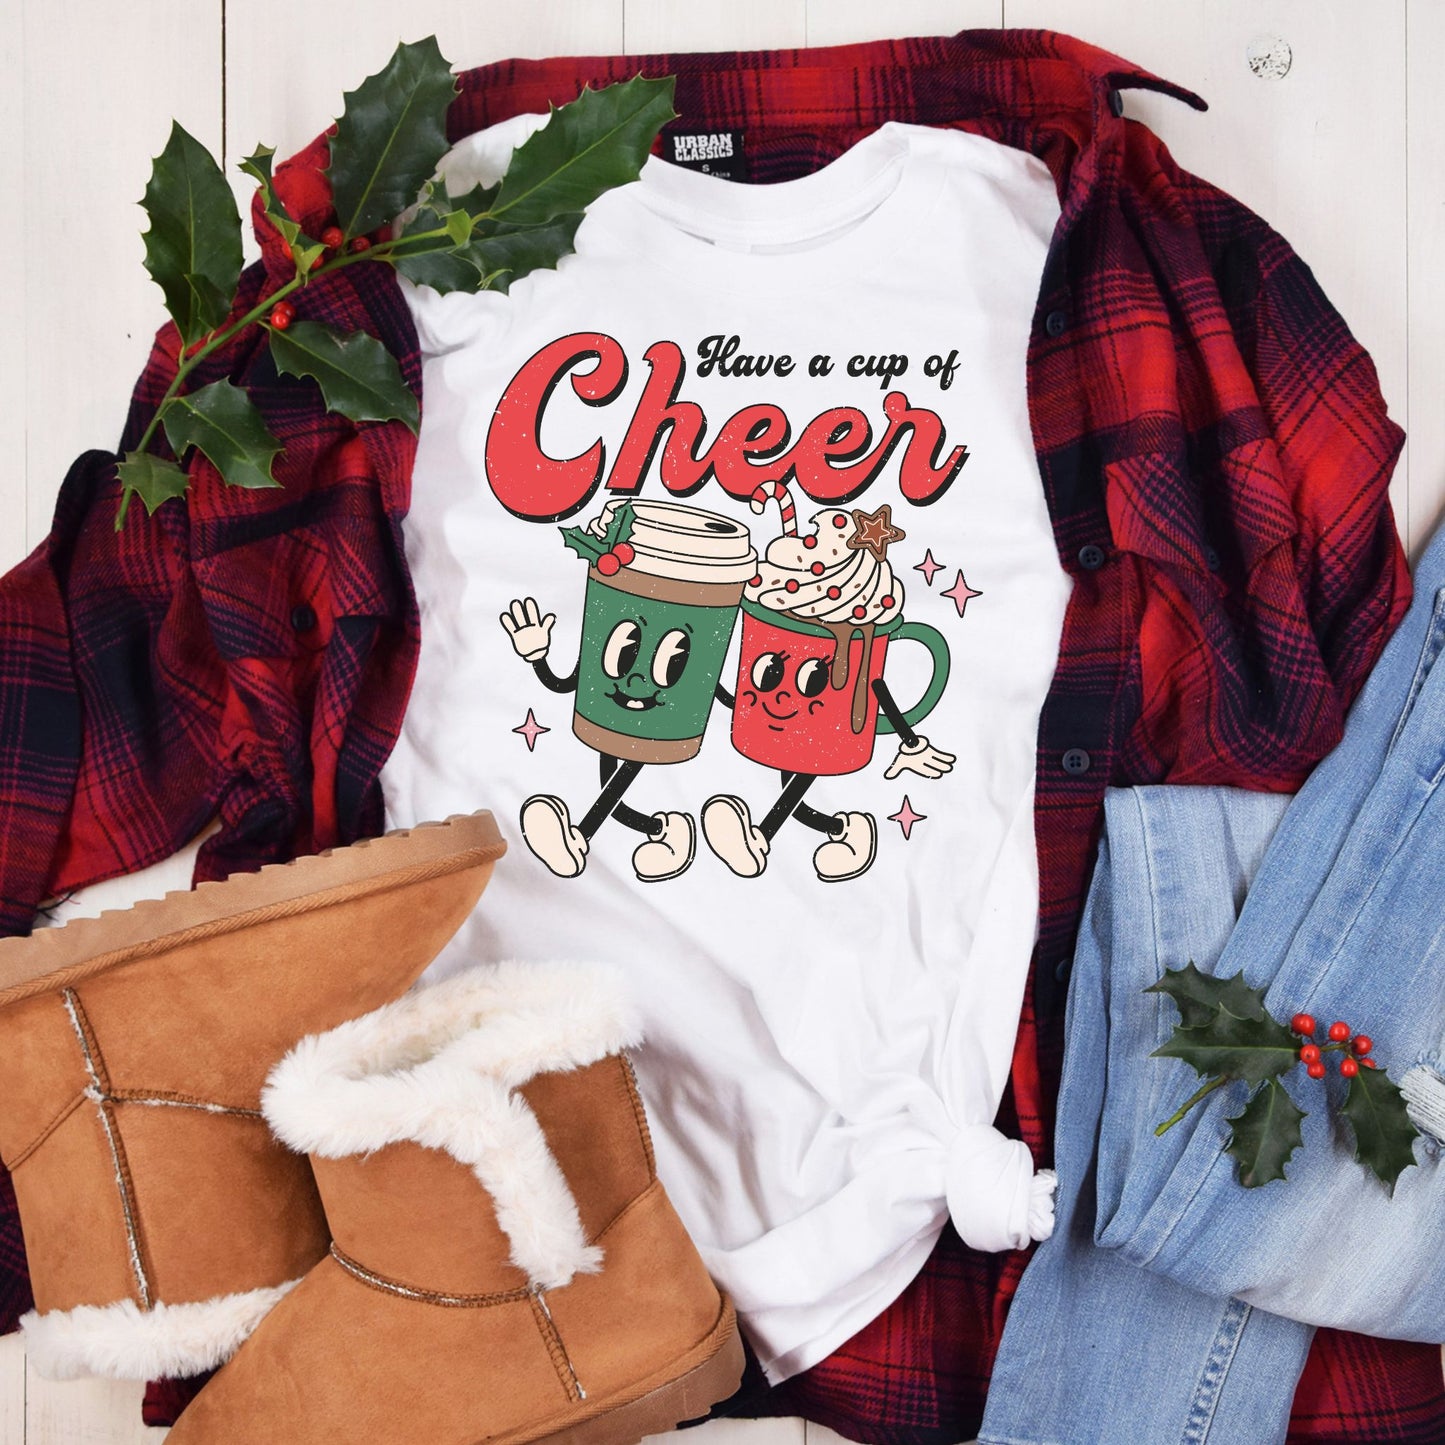 Have A Cup of Cheer Tee